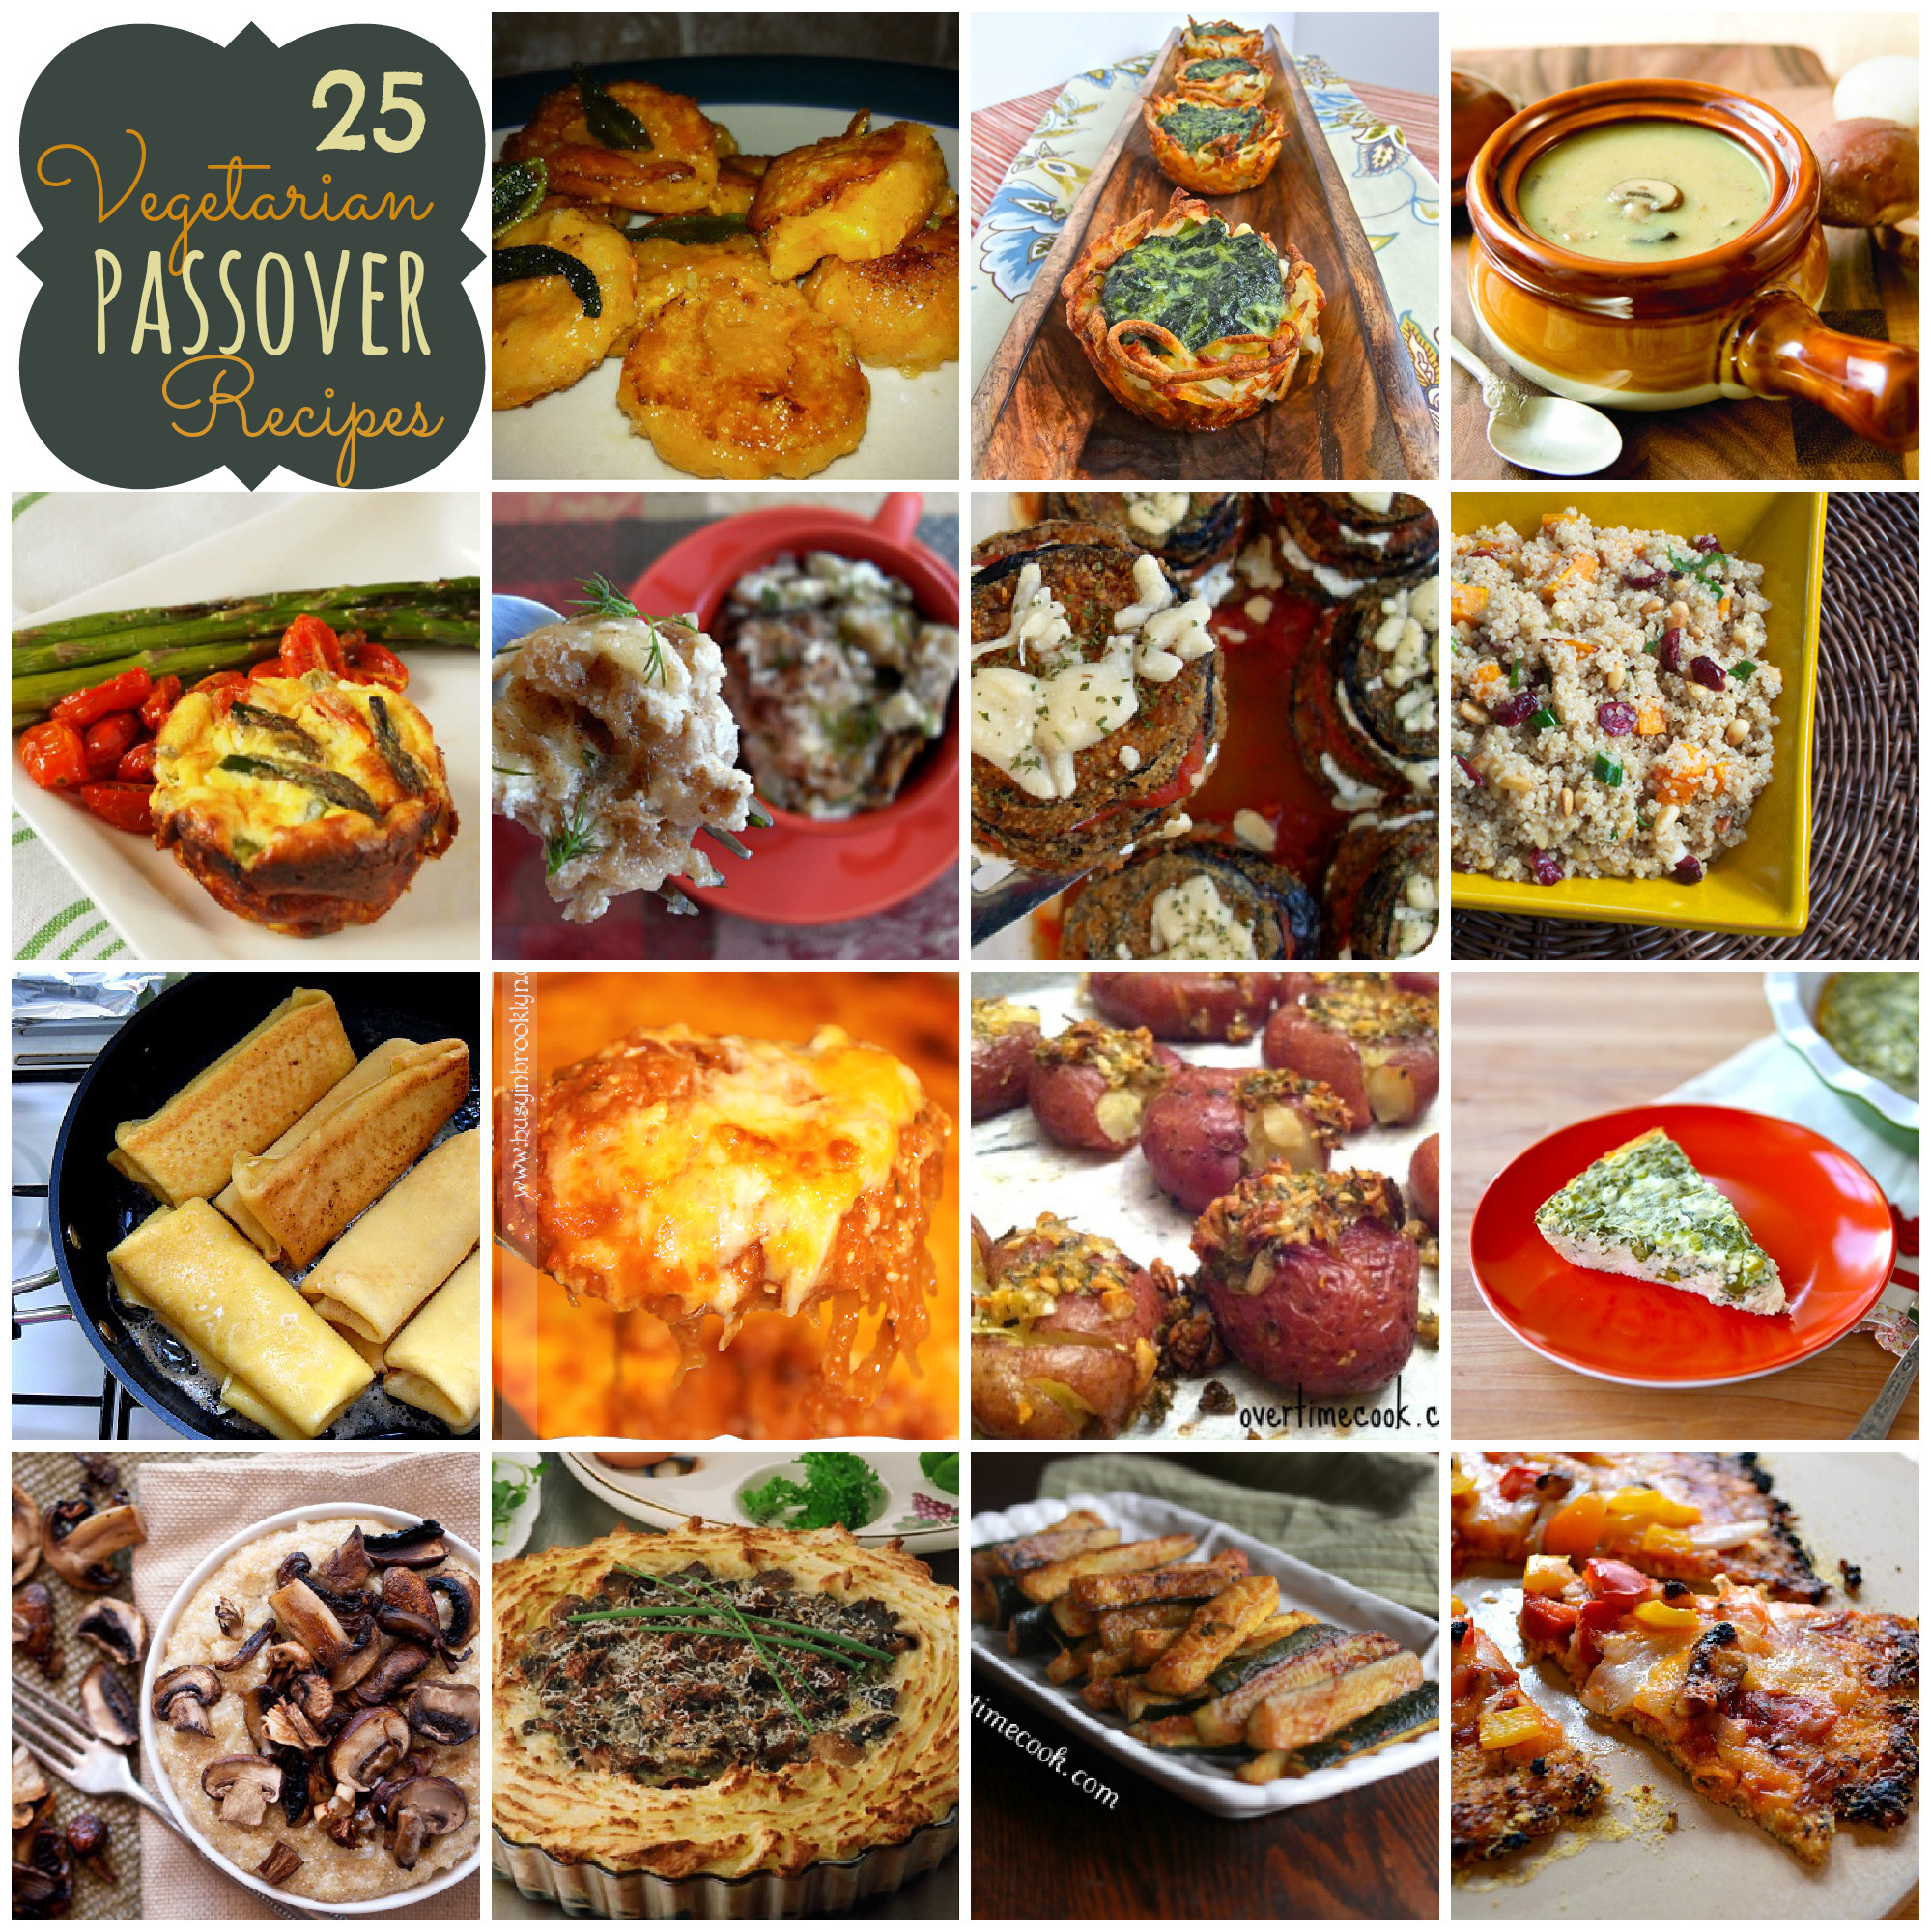 Passover Seder Food
 25 Ve arian Passover Recipes